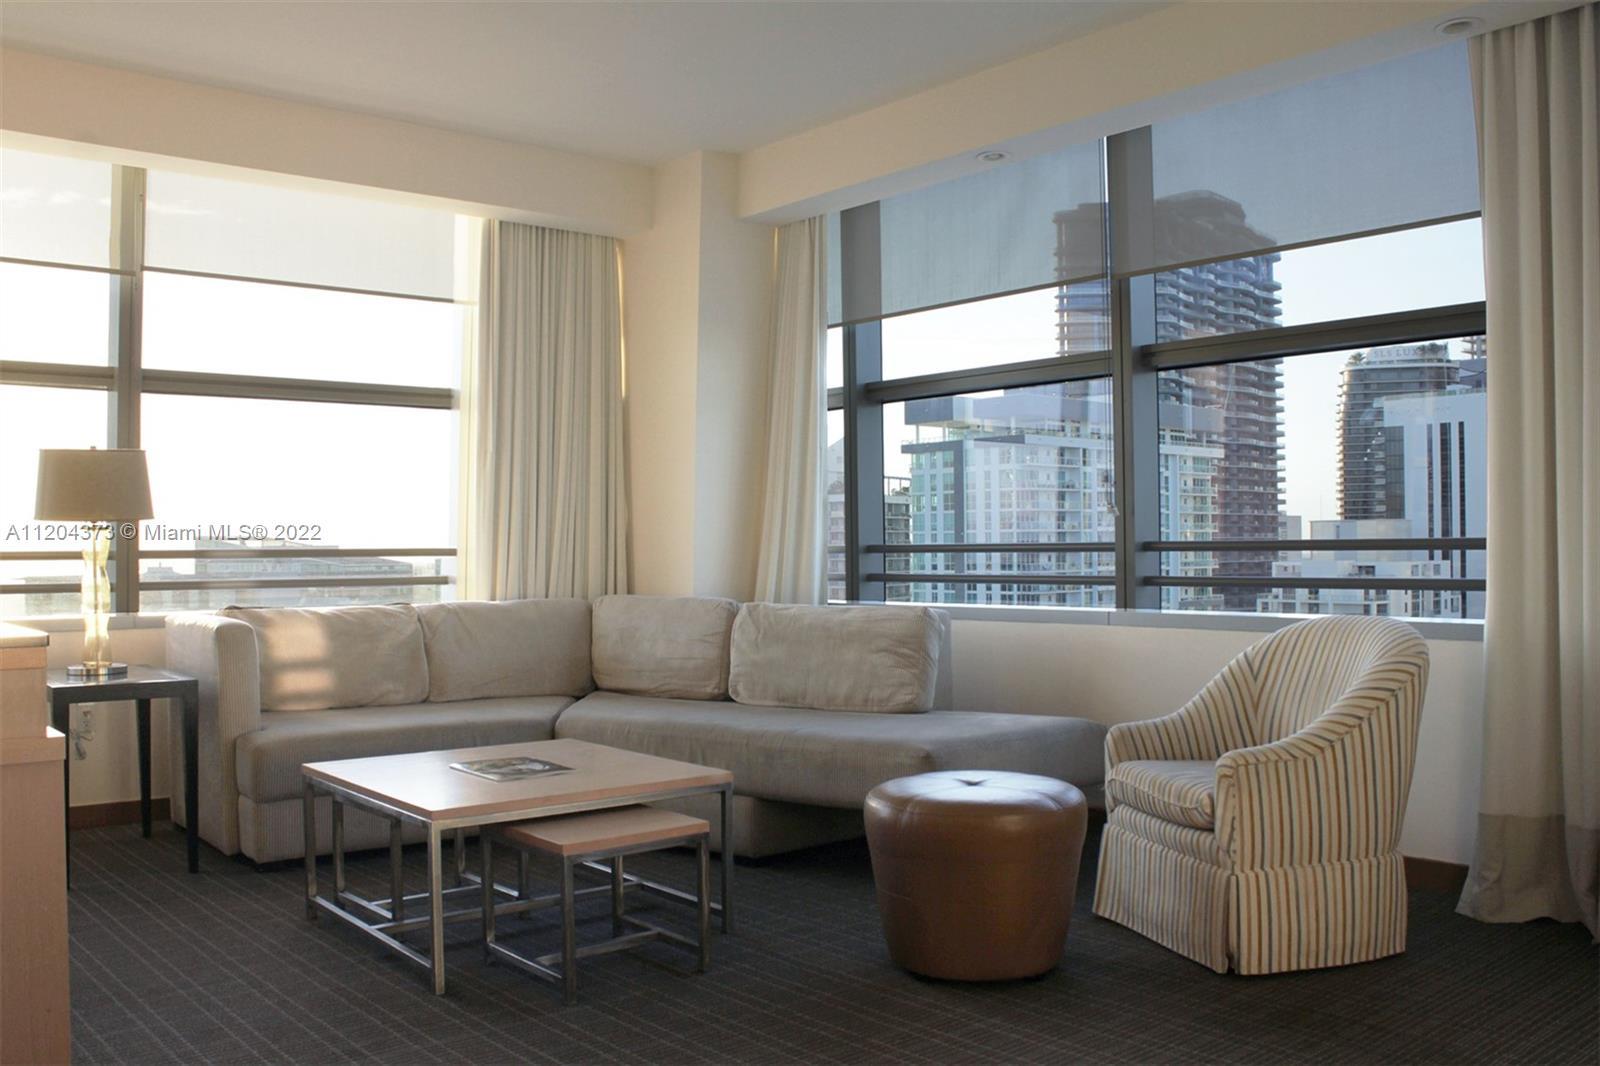 Large 2 beds, 2 baths (1,262 SF) Furnished offering beautiful views of the city, skyline and bay. No